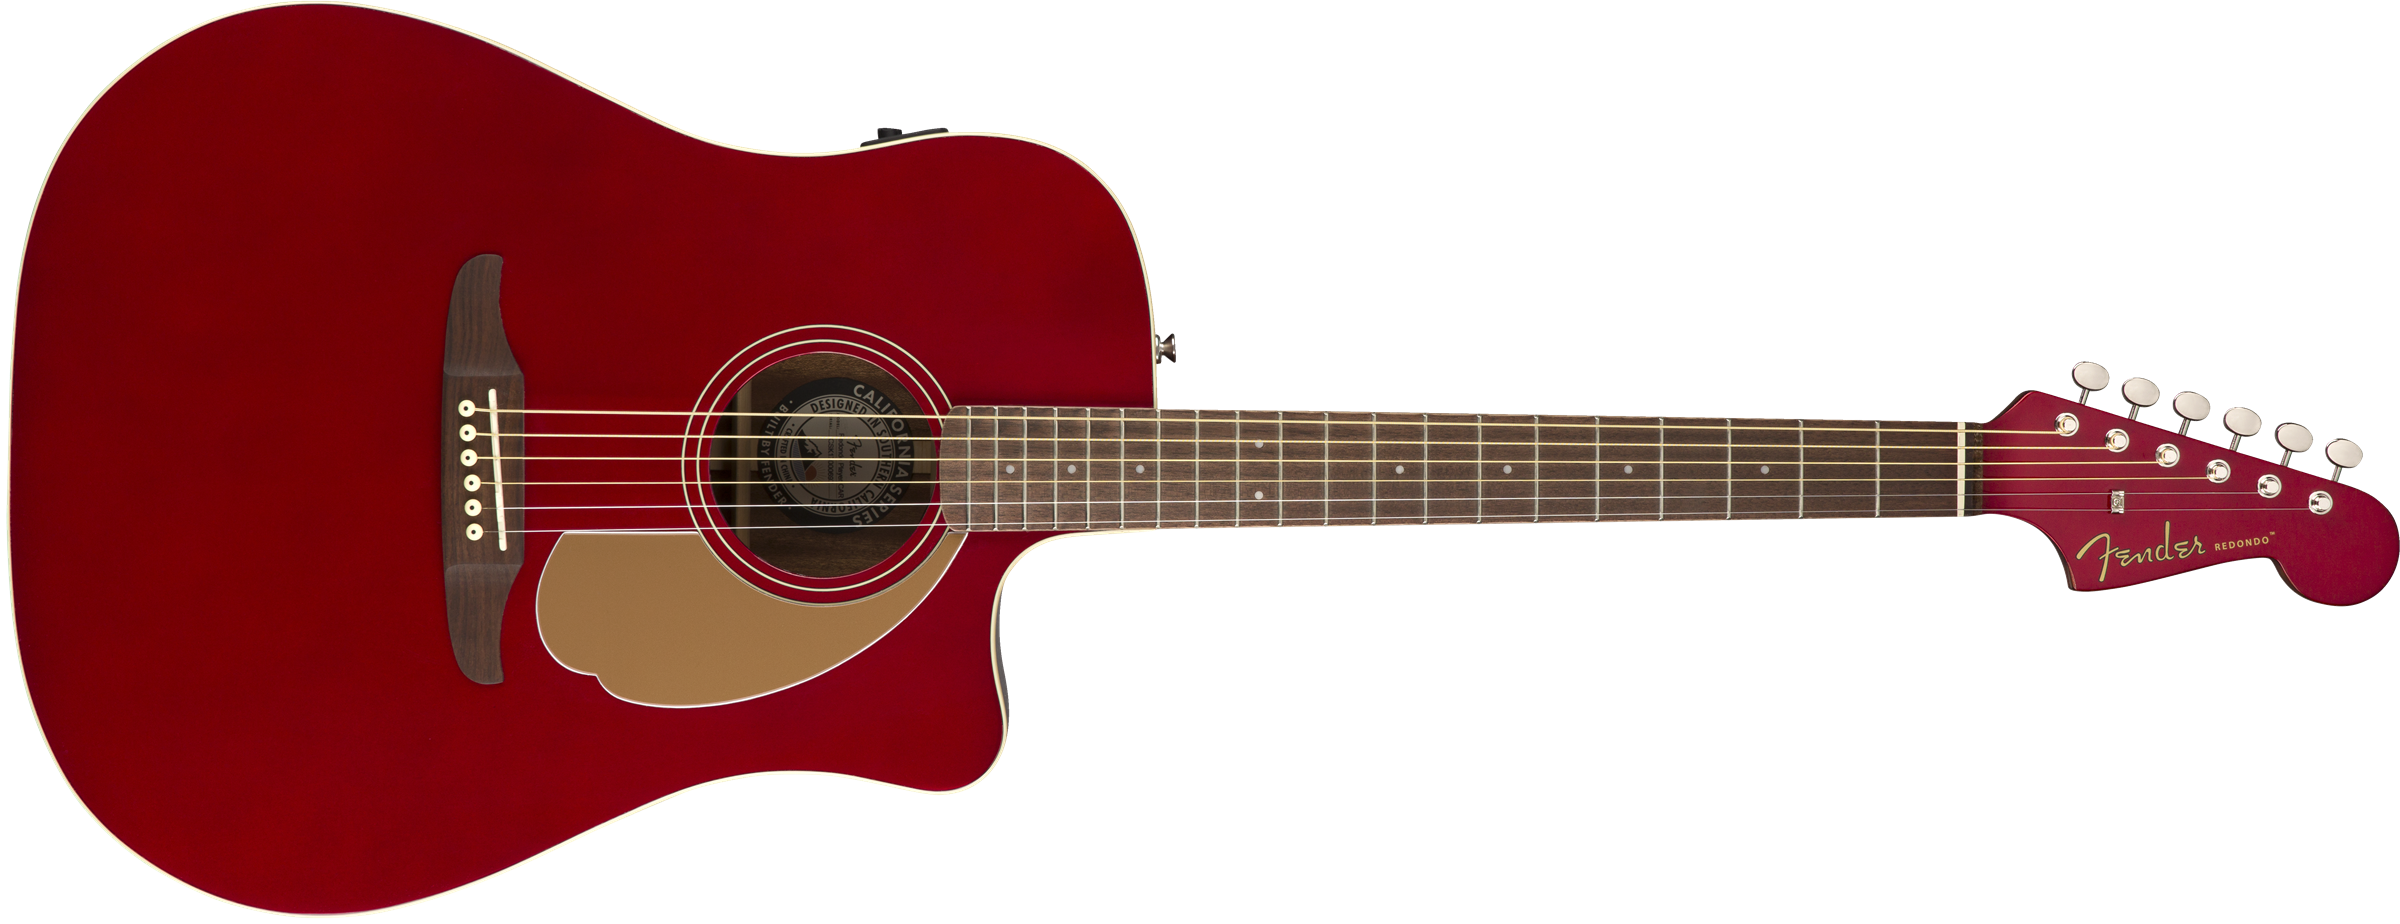 Fender Redondo Player - Candy Apple Red - Acoustic guitar & electro - Variation 1